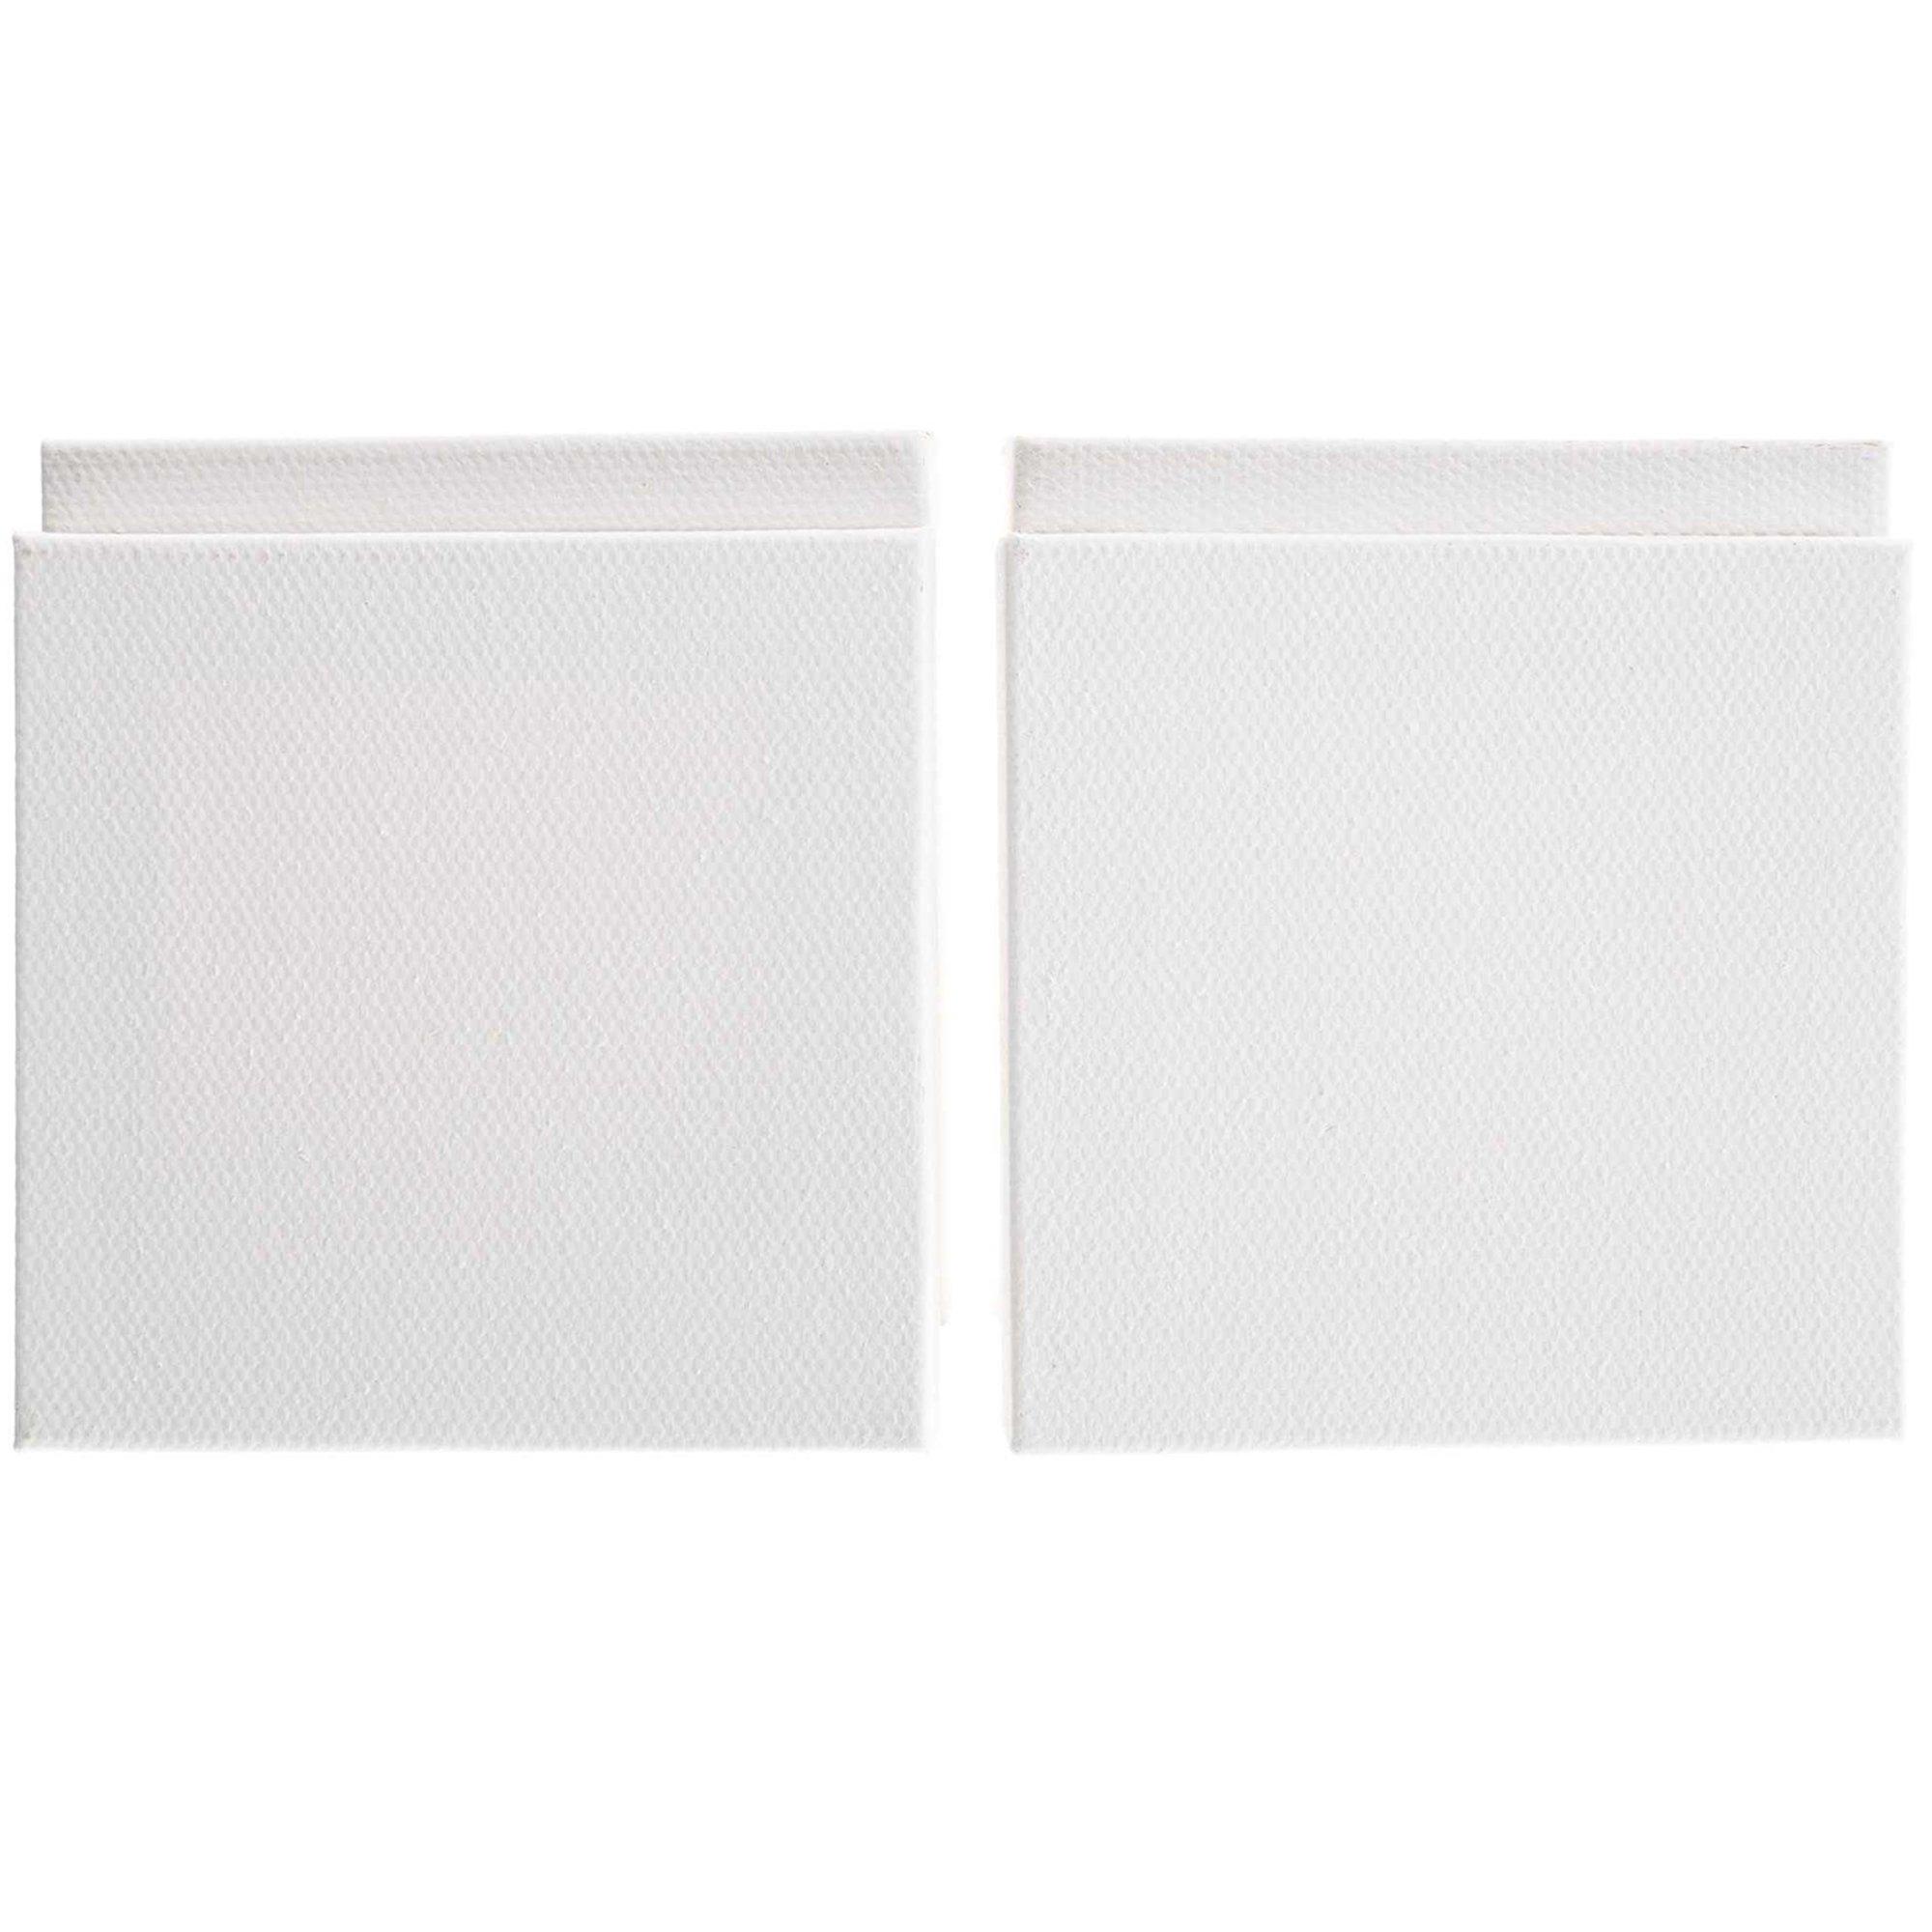 The Fine Touch Blank Canvas Set - 8 x 10